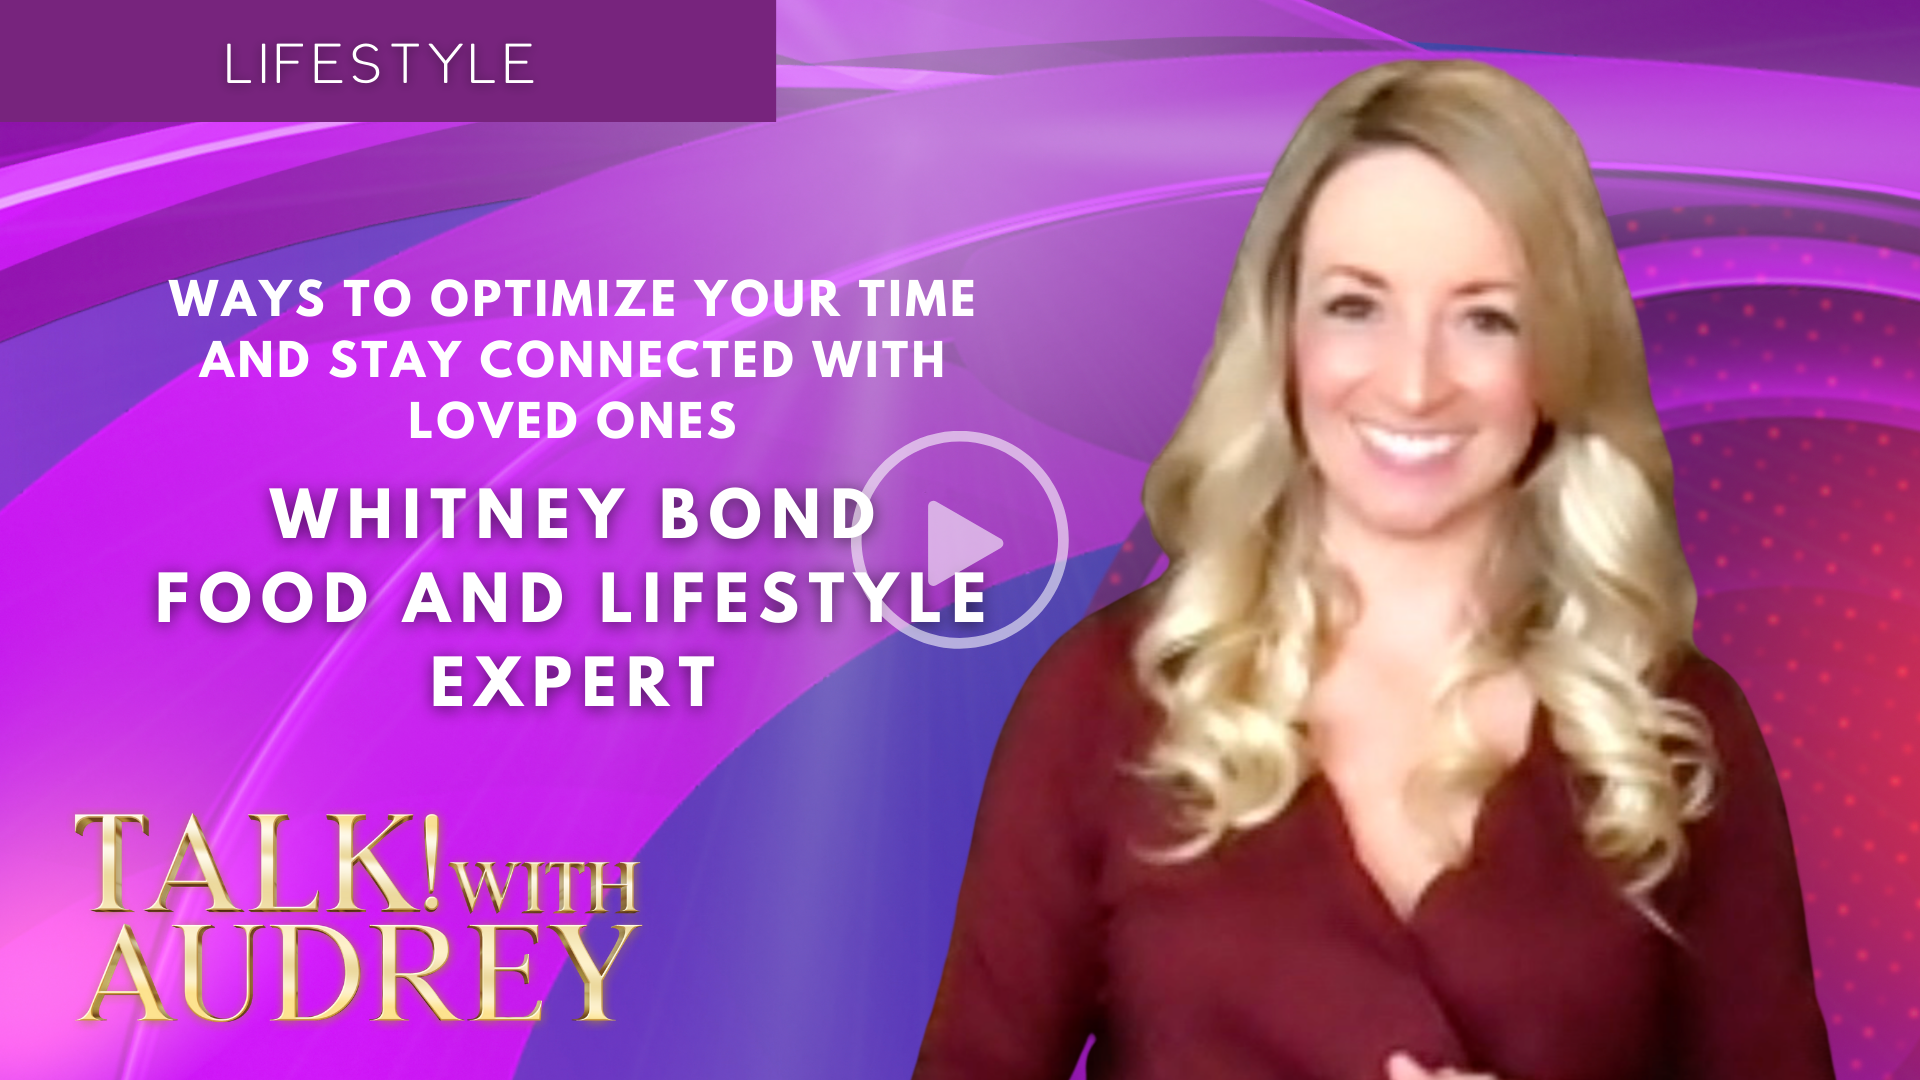 Whitney Bond - Ways to Optimize Your Time and Stay Connected with Loved Ones